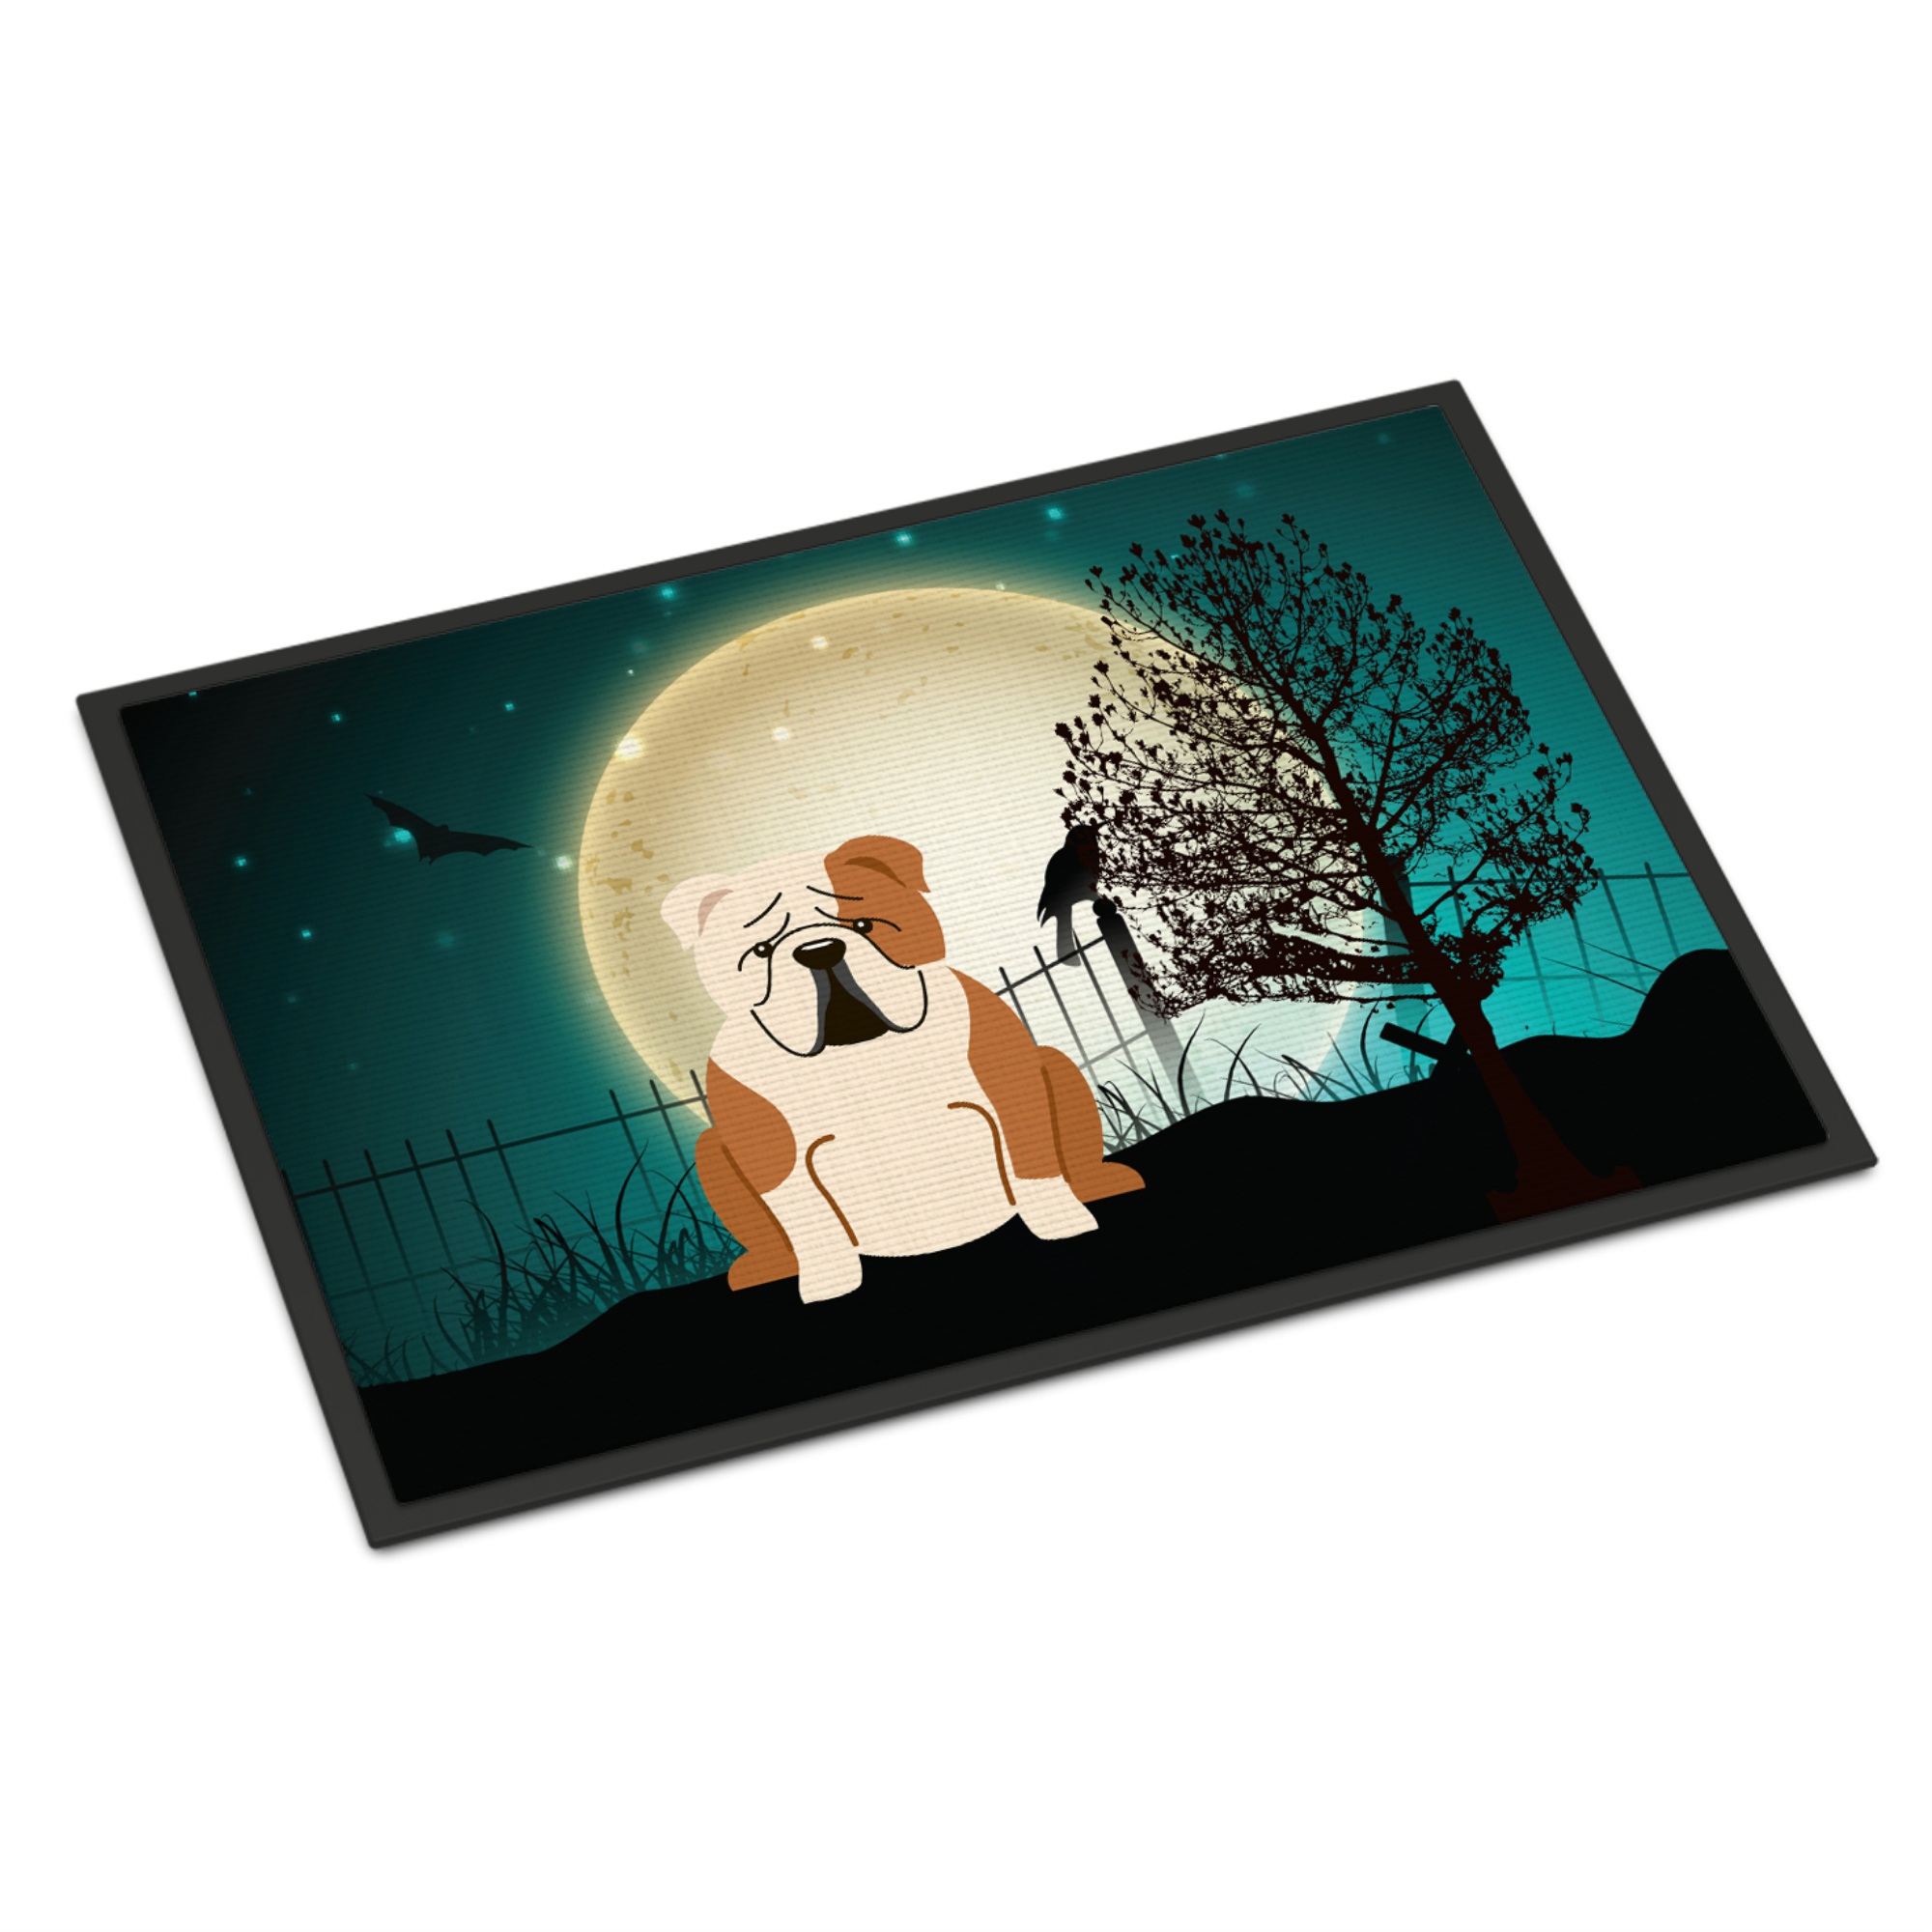 Caroline's Treasures "Caroline's Treasures Halloween Scary English Bulldog Fawn White Indoor or Outdoor Mat 18x27 BB2315MAT 18 x 27"" Multicolor"